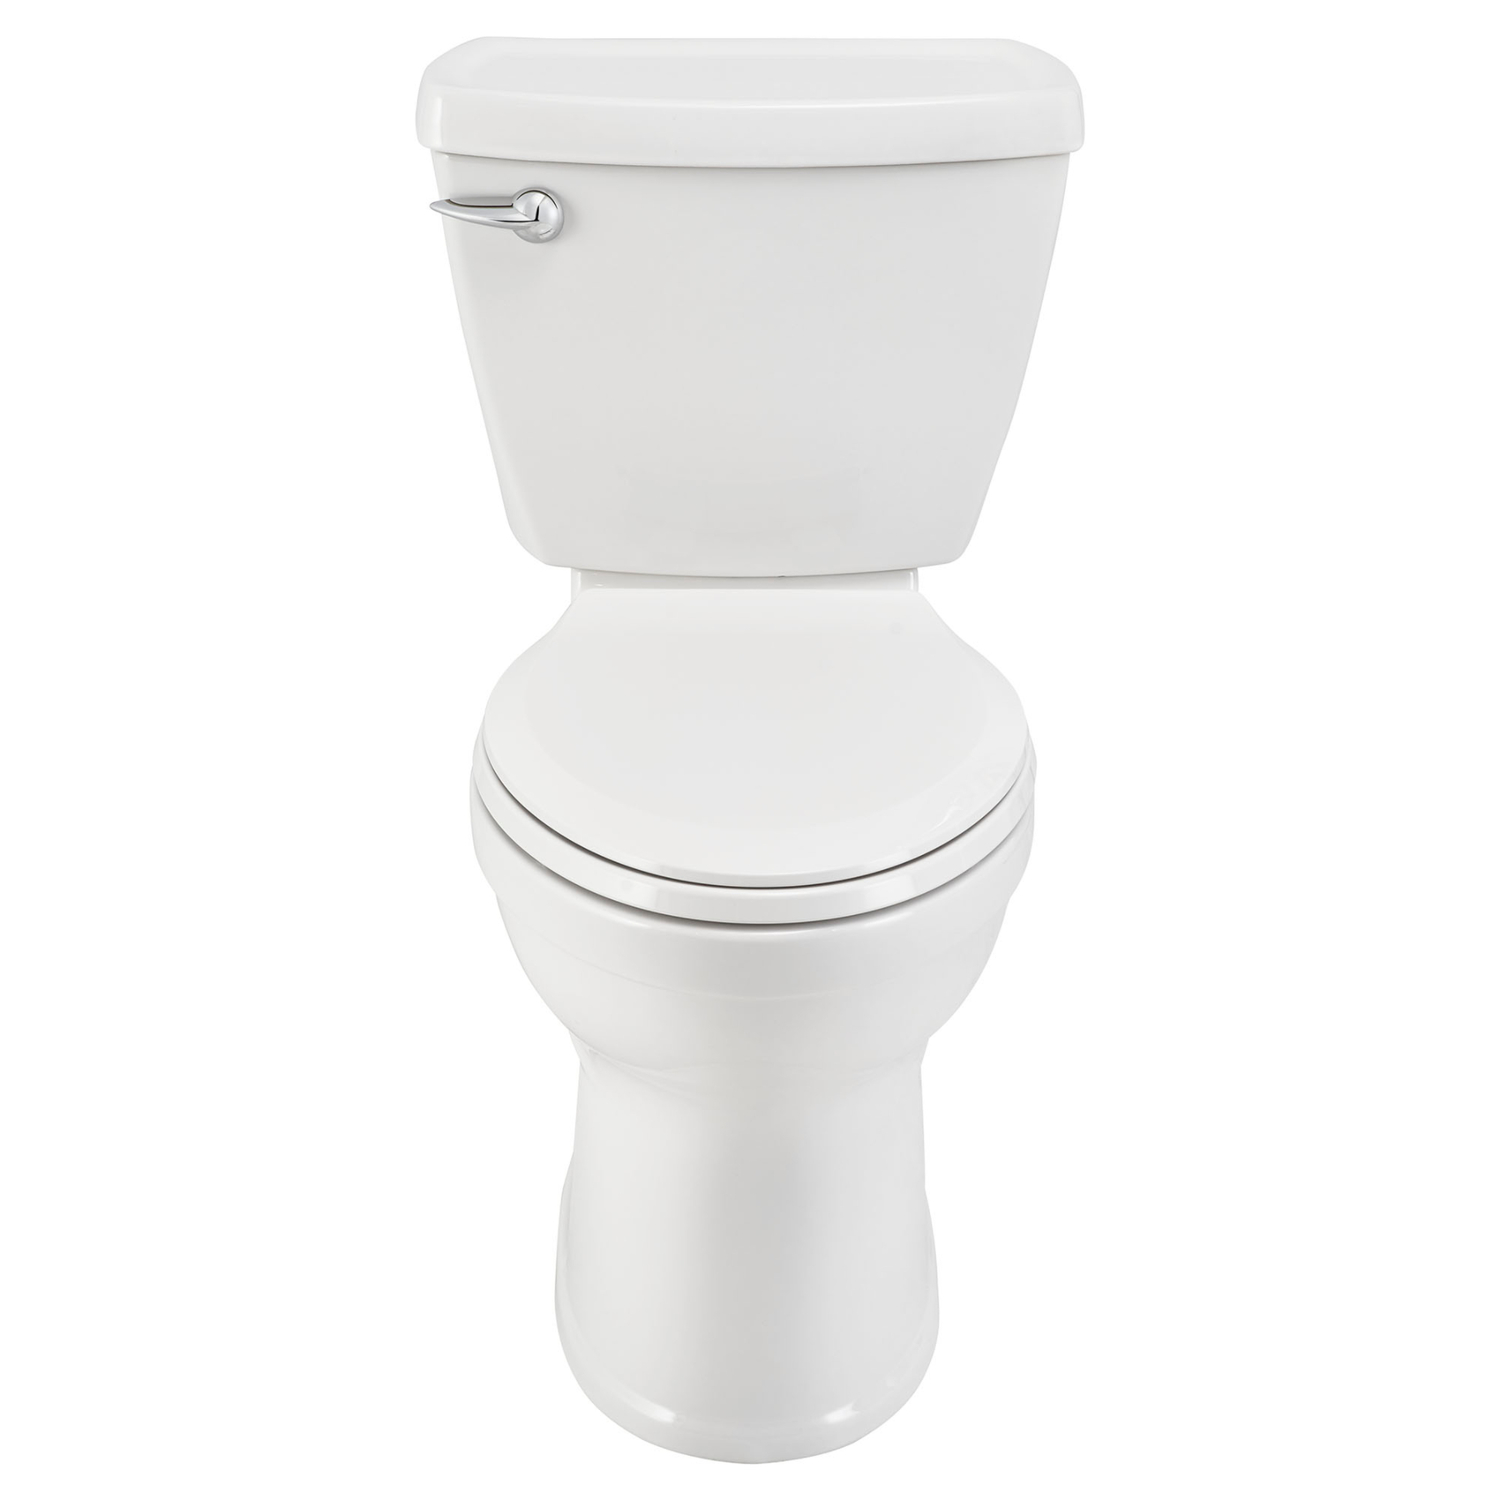 American Standard Champion 4 ADA Compliant 1.6 gal White Elongated Complete Toilet